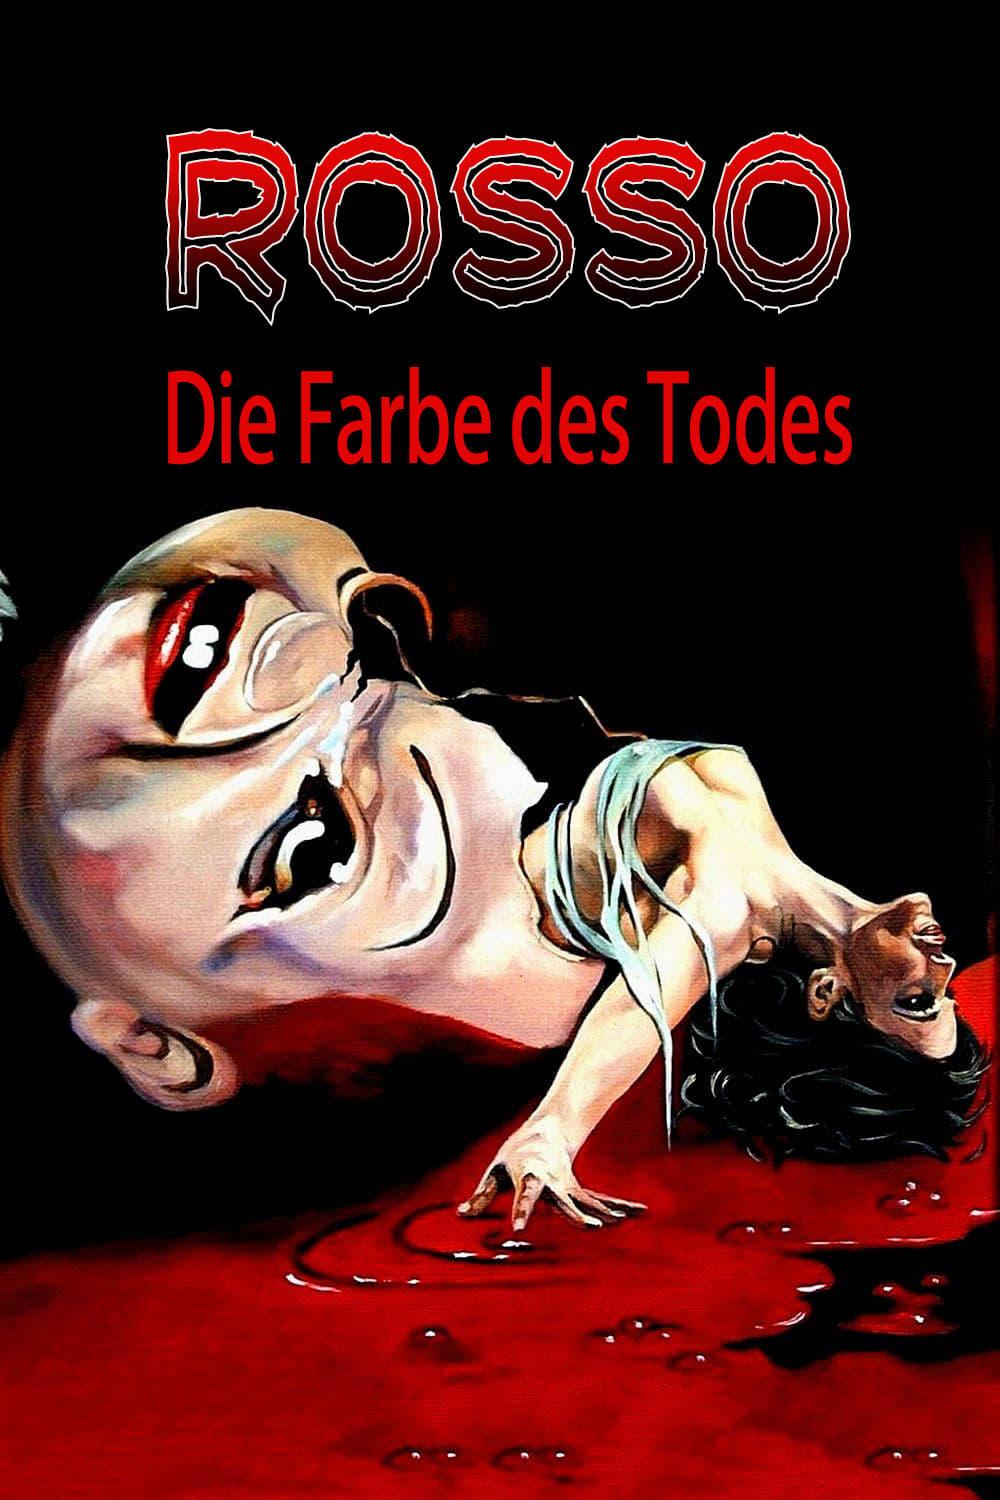 Rosso - Die Farbe des Todes poster